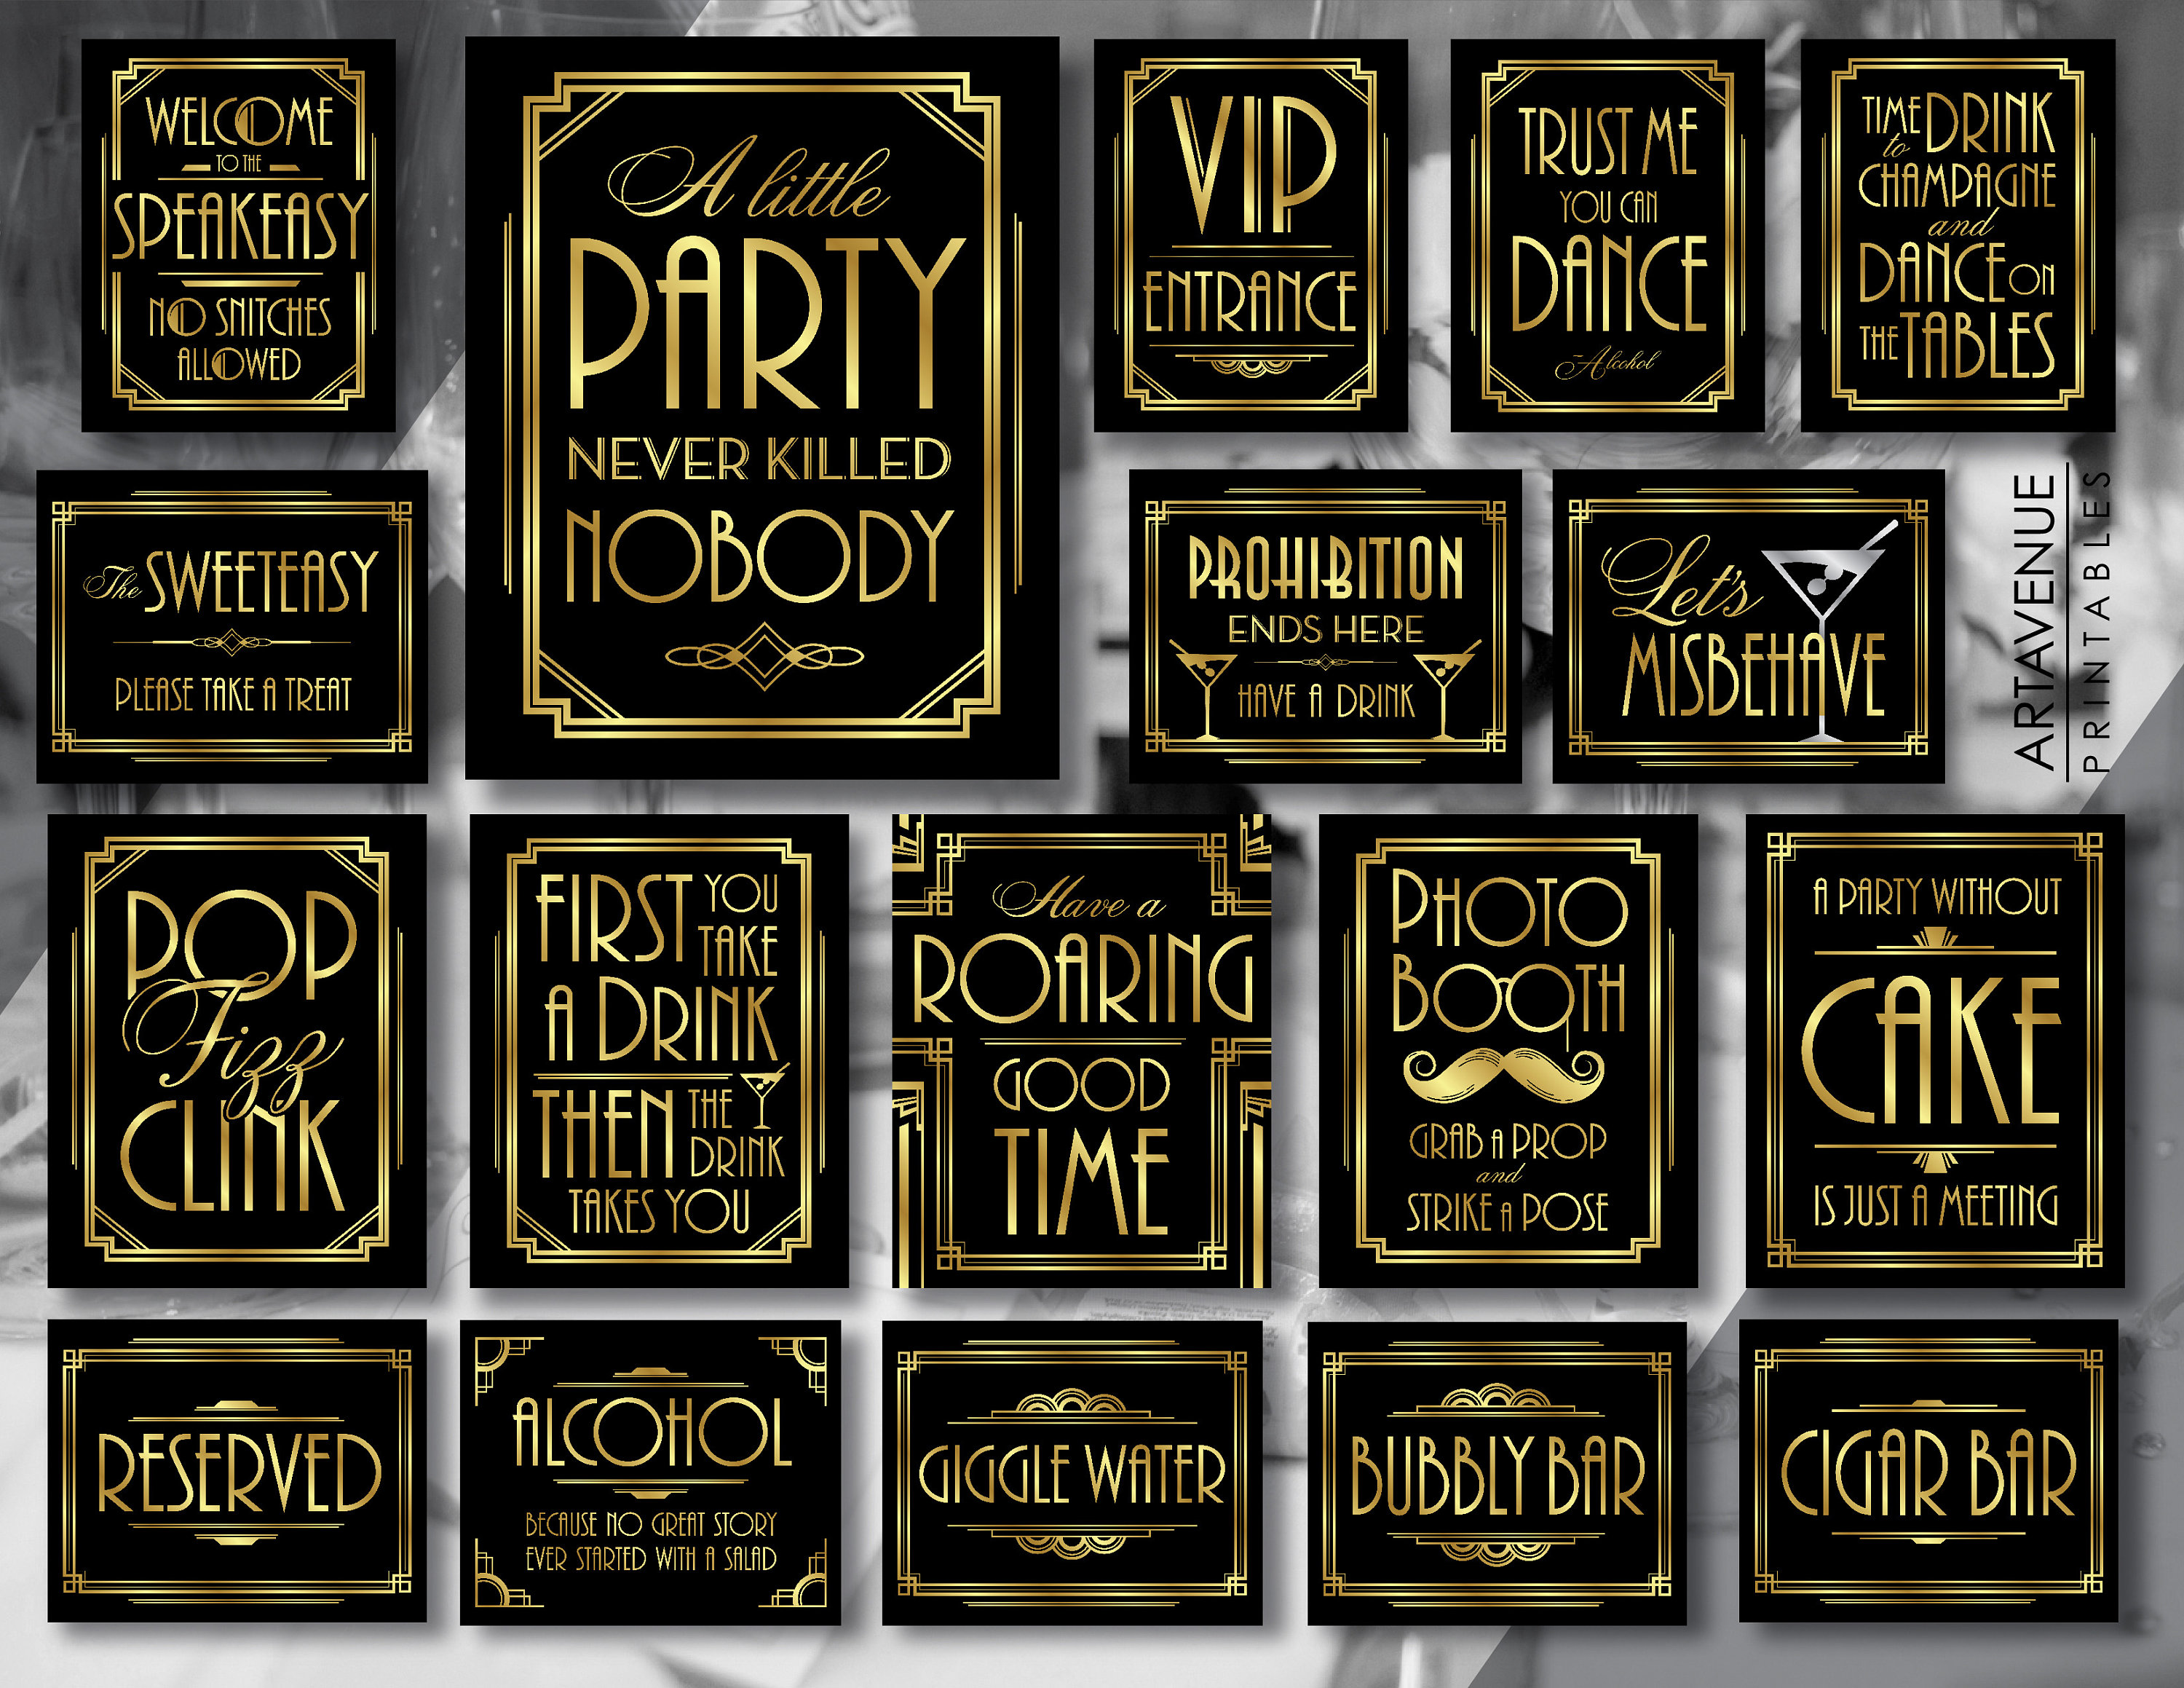 Great Gatsby Theme Birthday Party Photography Background Black Golden Line  Customize Birthday Party Decor Backdrops Banner